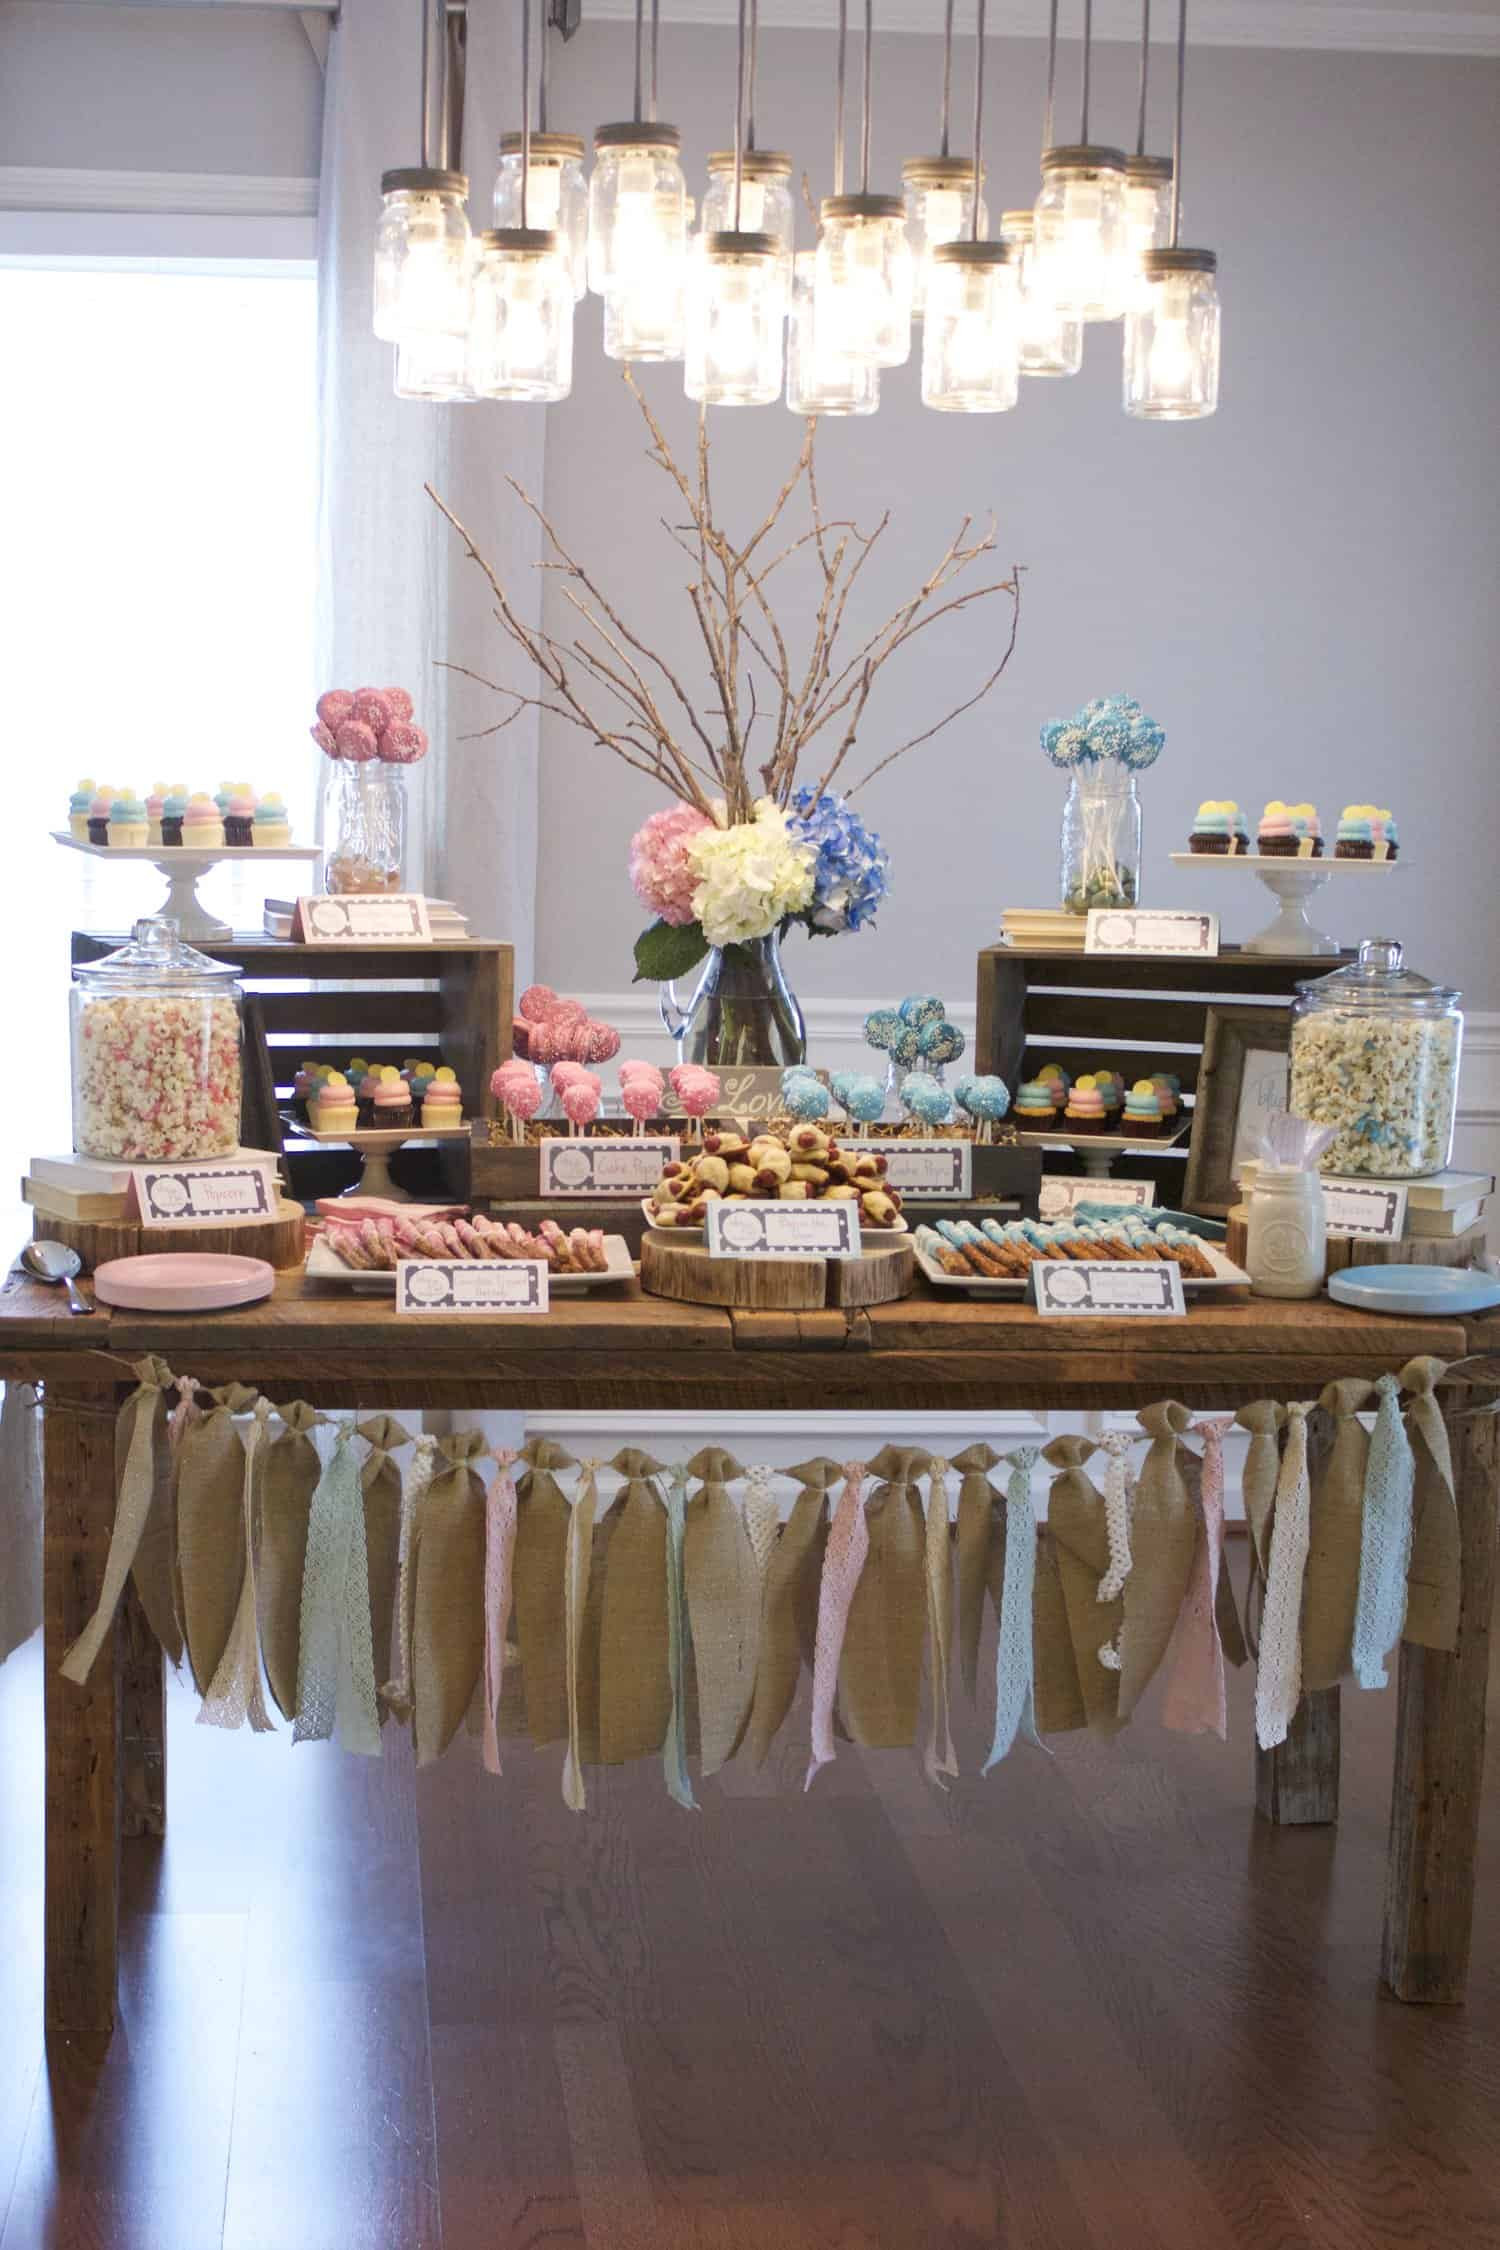 Reveal Gender Party Ideas
 17 Tips To Throw An Unfor table Gender Reveal Party